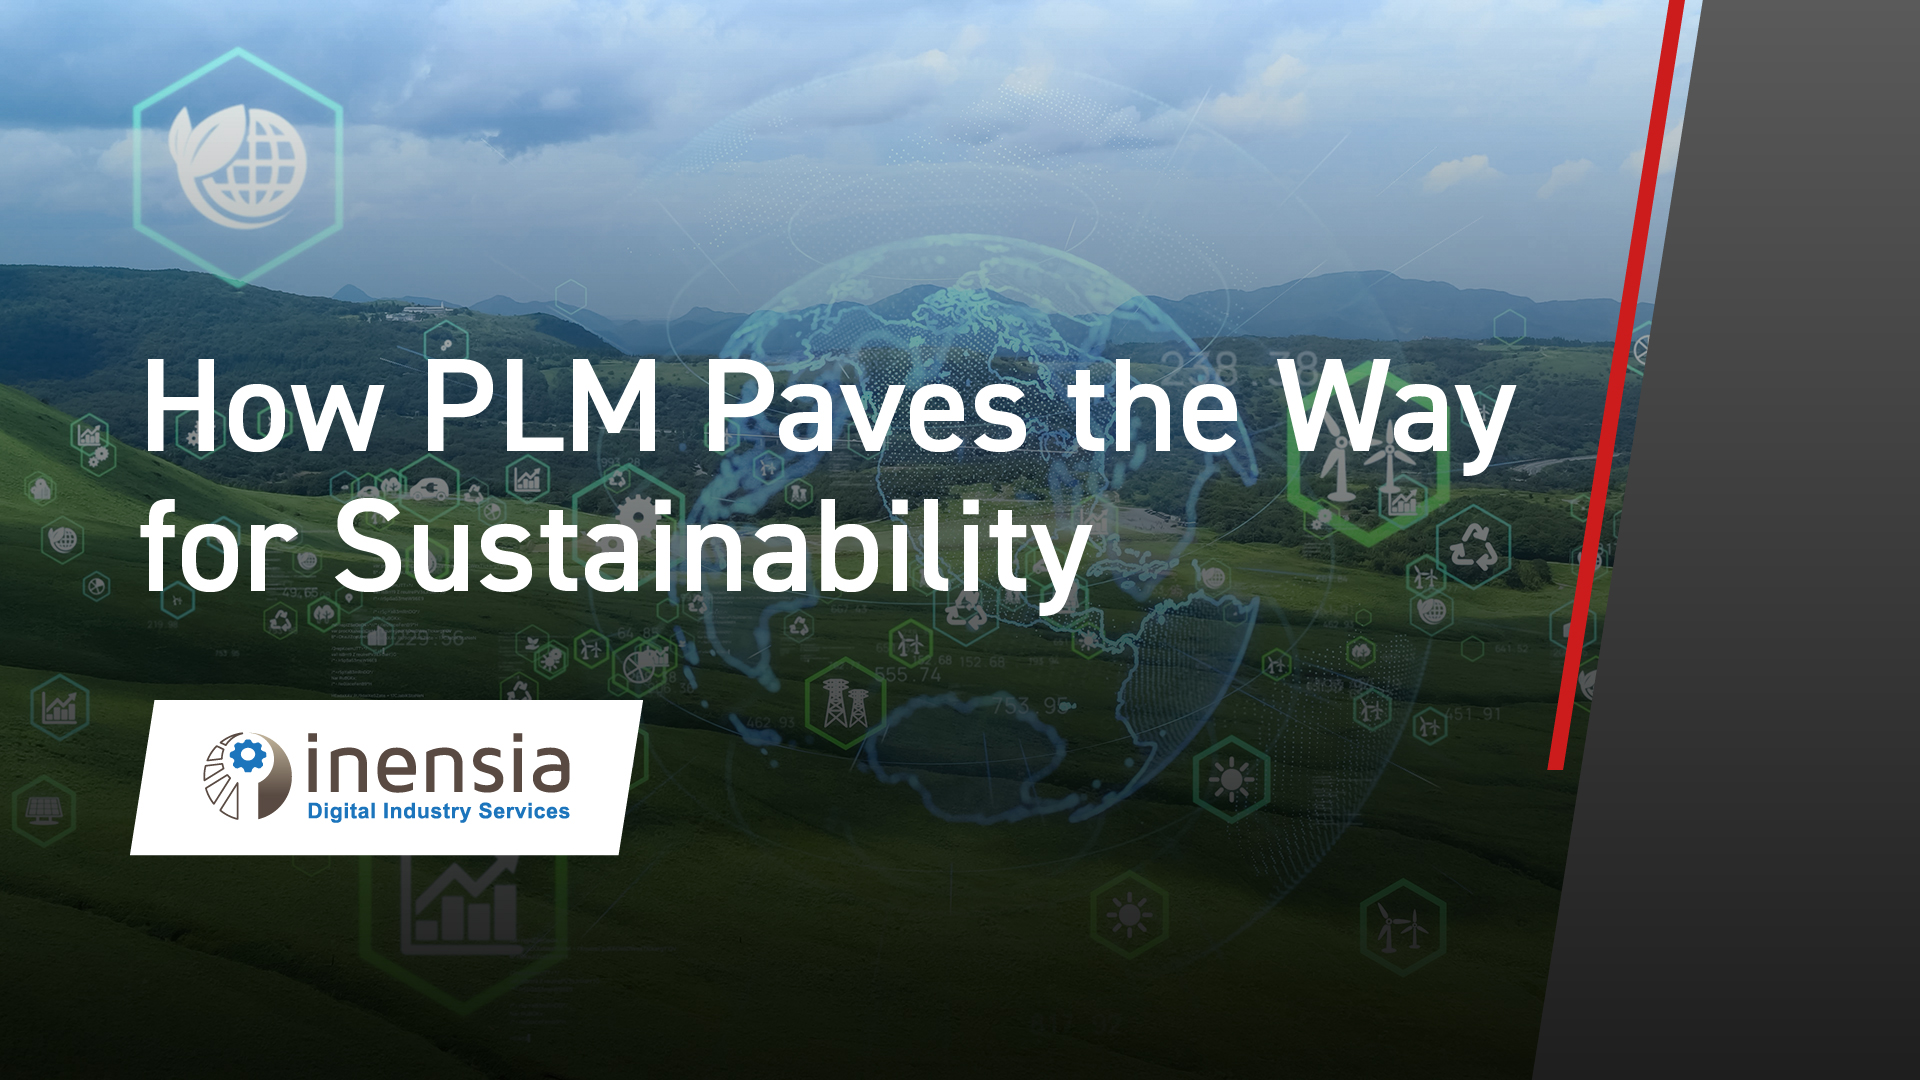 How PLM Paves the Way for Sustainability